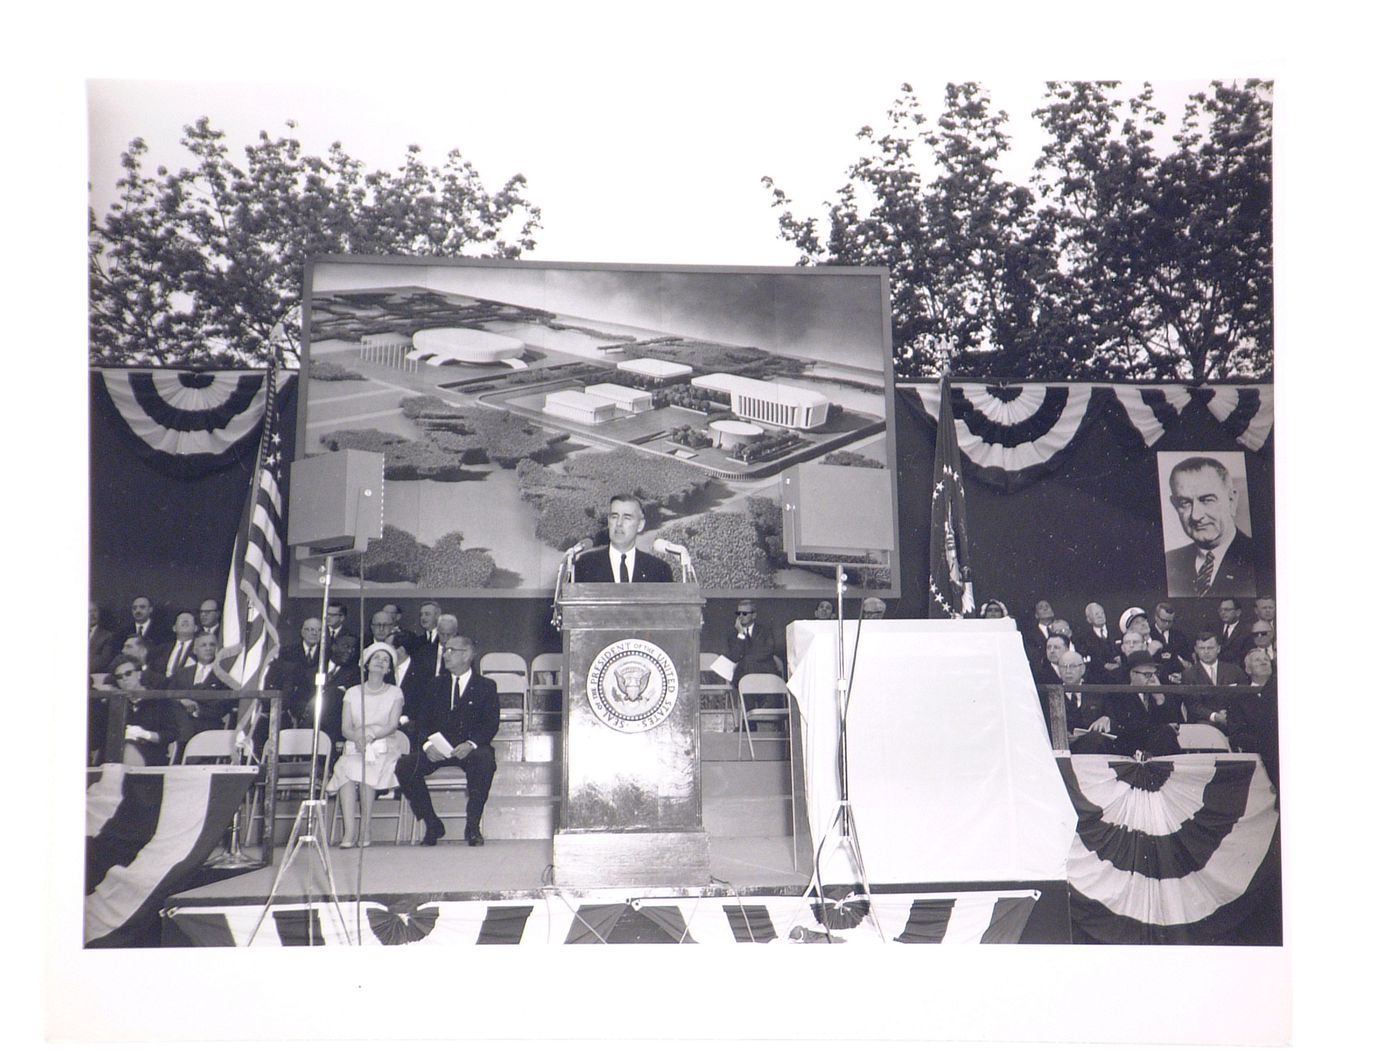 View of the dedication ceremony of the John F. Kennedy Educational, Civic and Cultural Center showing a partial view of the platform with people, posters of President Lyndon B. Johnson and a photograph of the model of the building, Mineola, New York